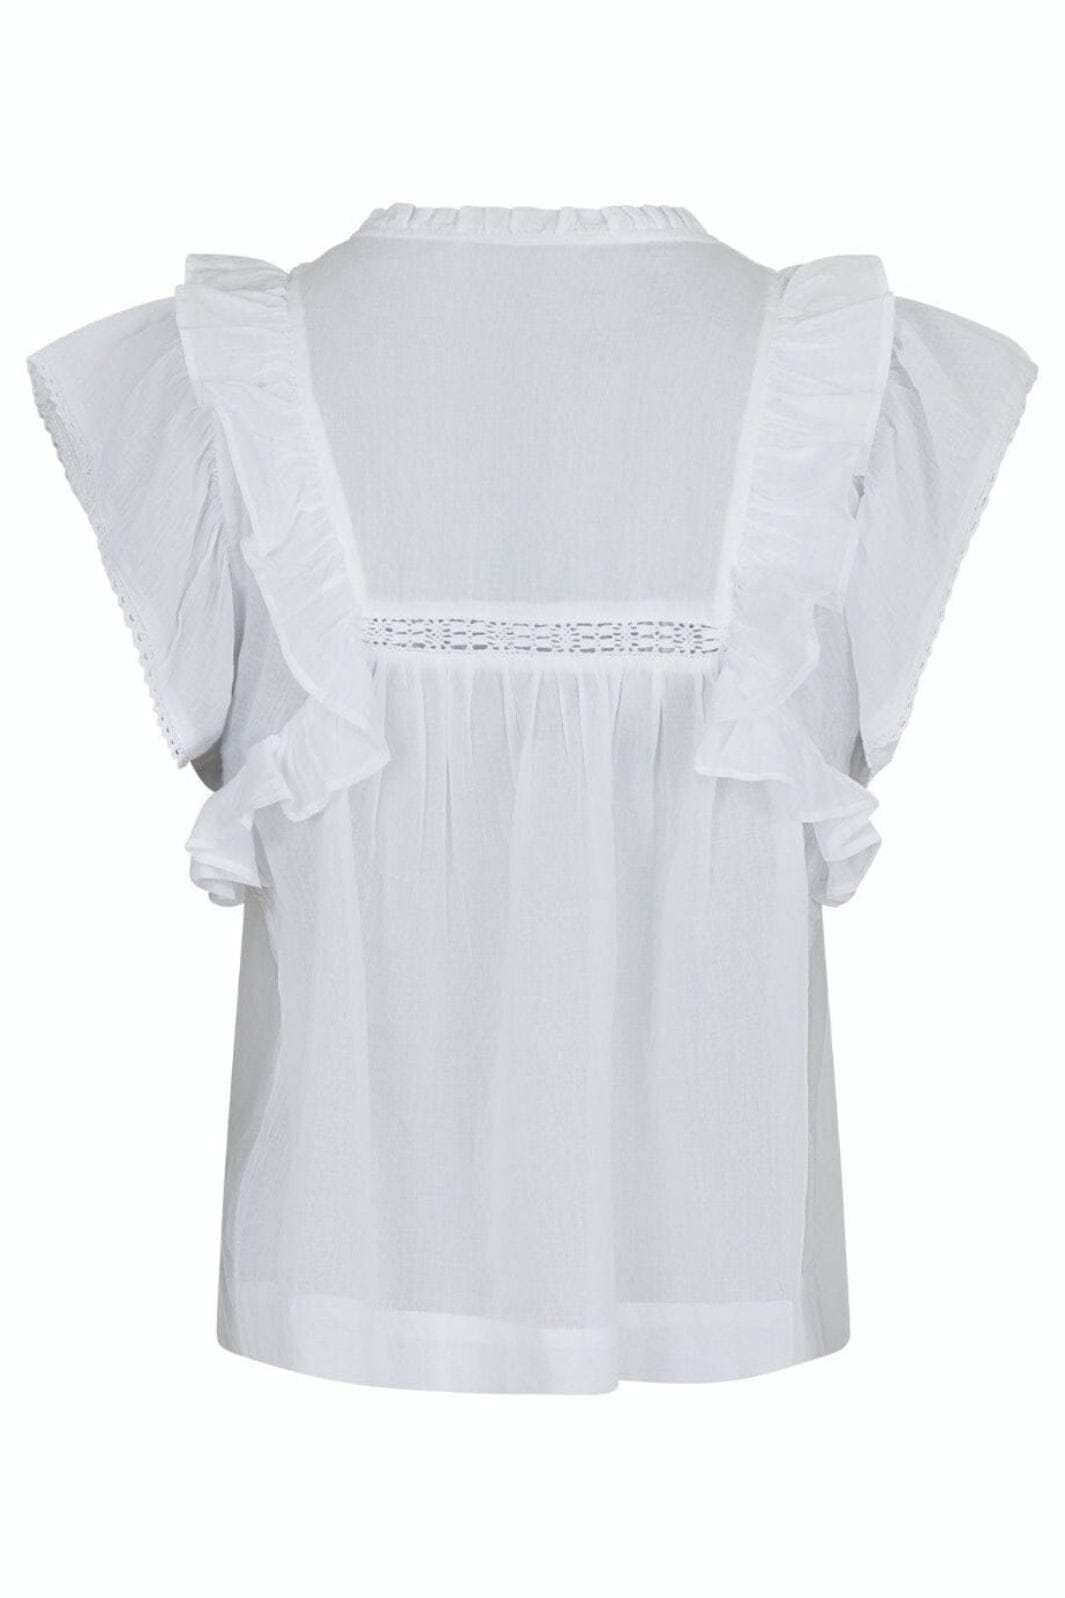 Neo Noir - Jayla S Voile Top - White Toppe 